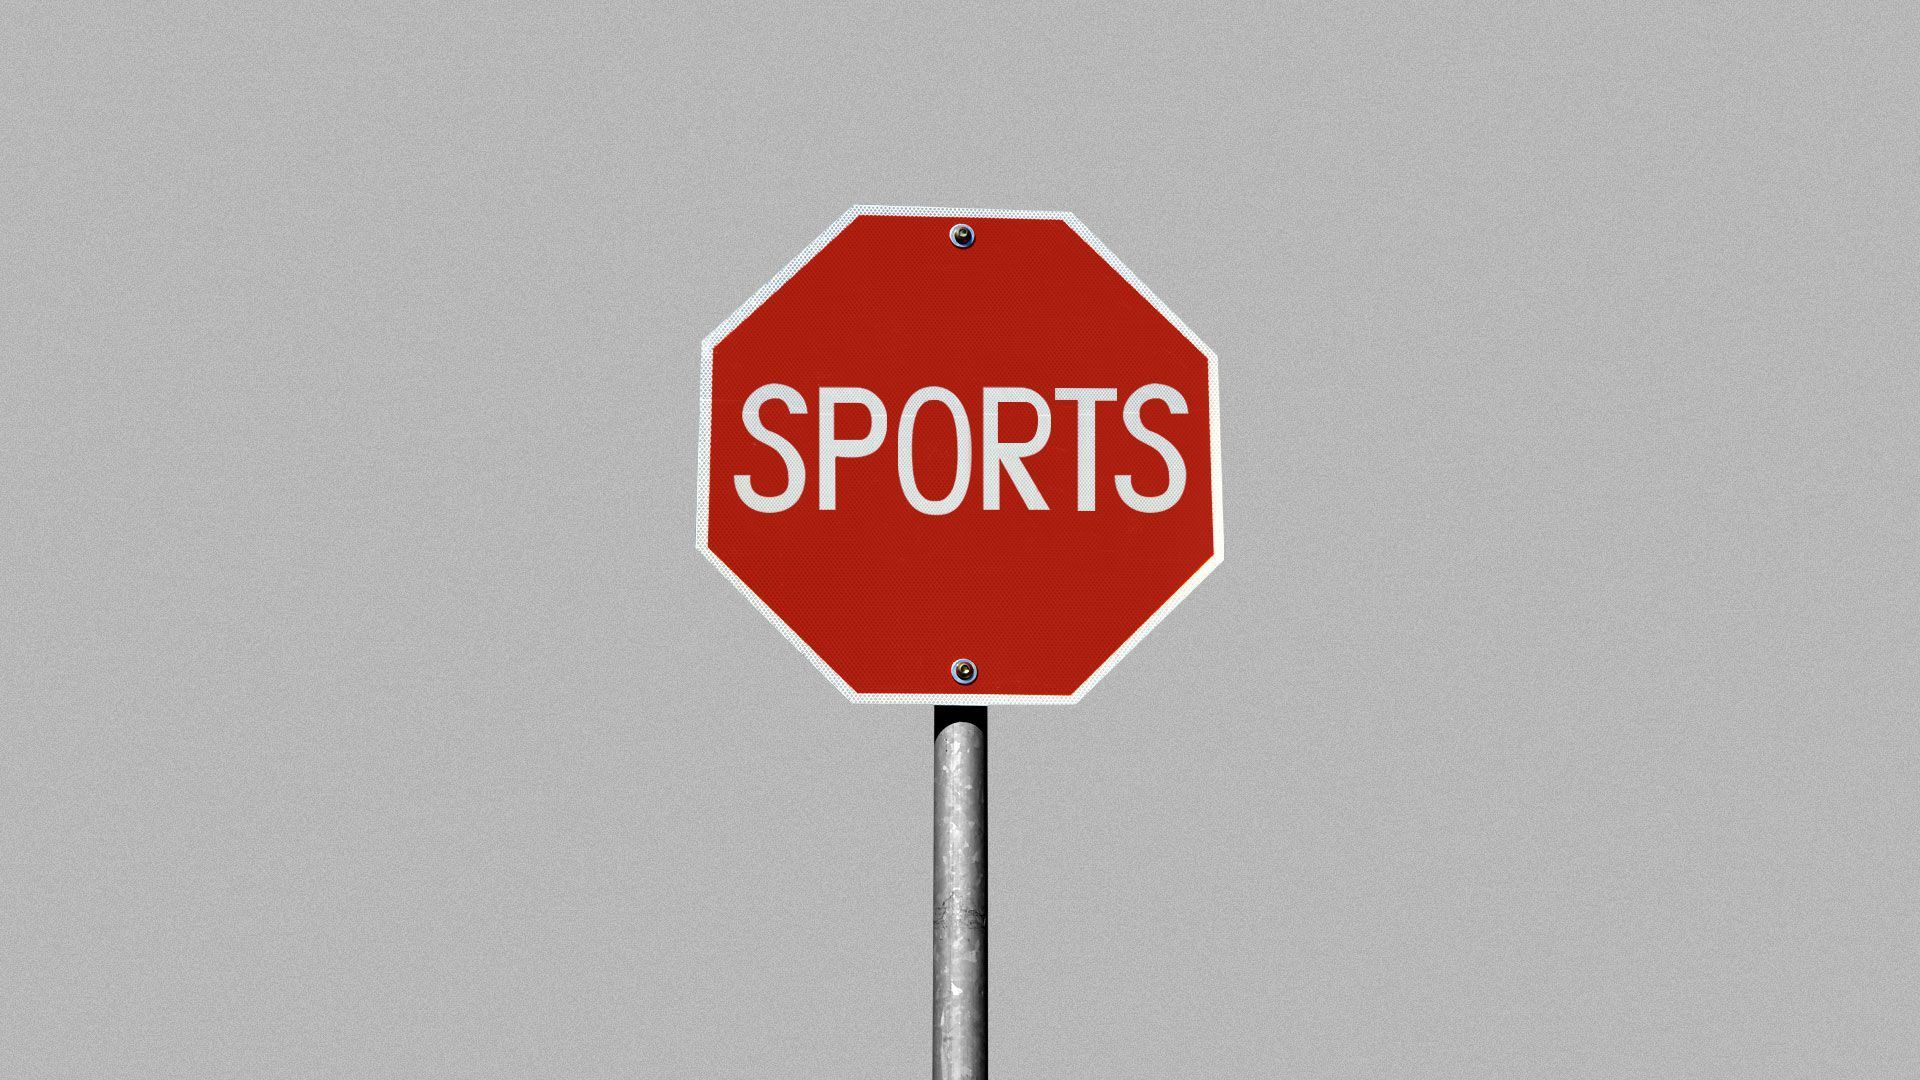 Illustration of a spot sign with "sports" written on it.